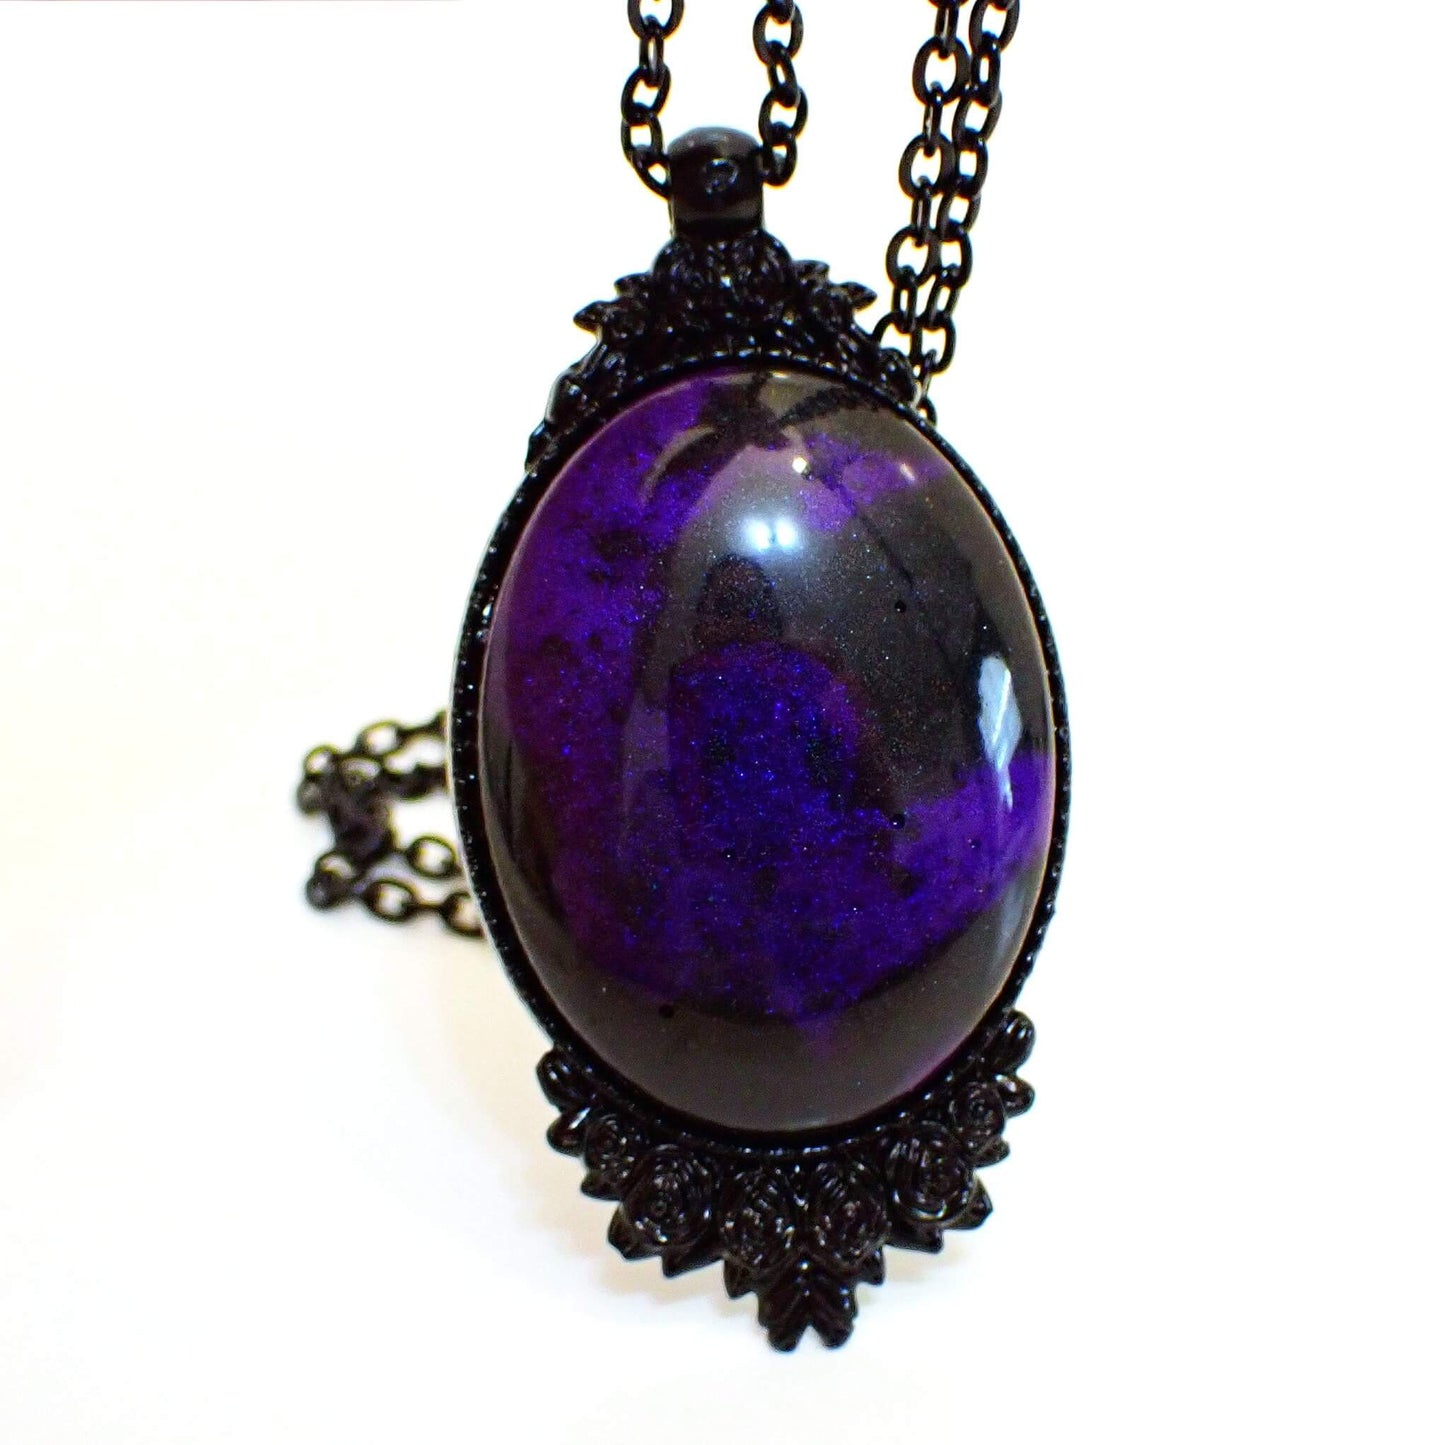 Large Victorian Style Goth Handmade Resin Black Oval Pendant Necklace